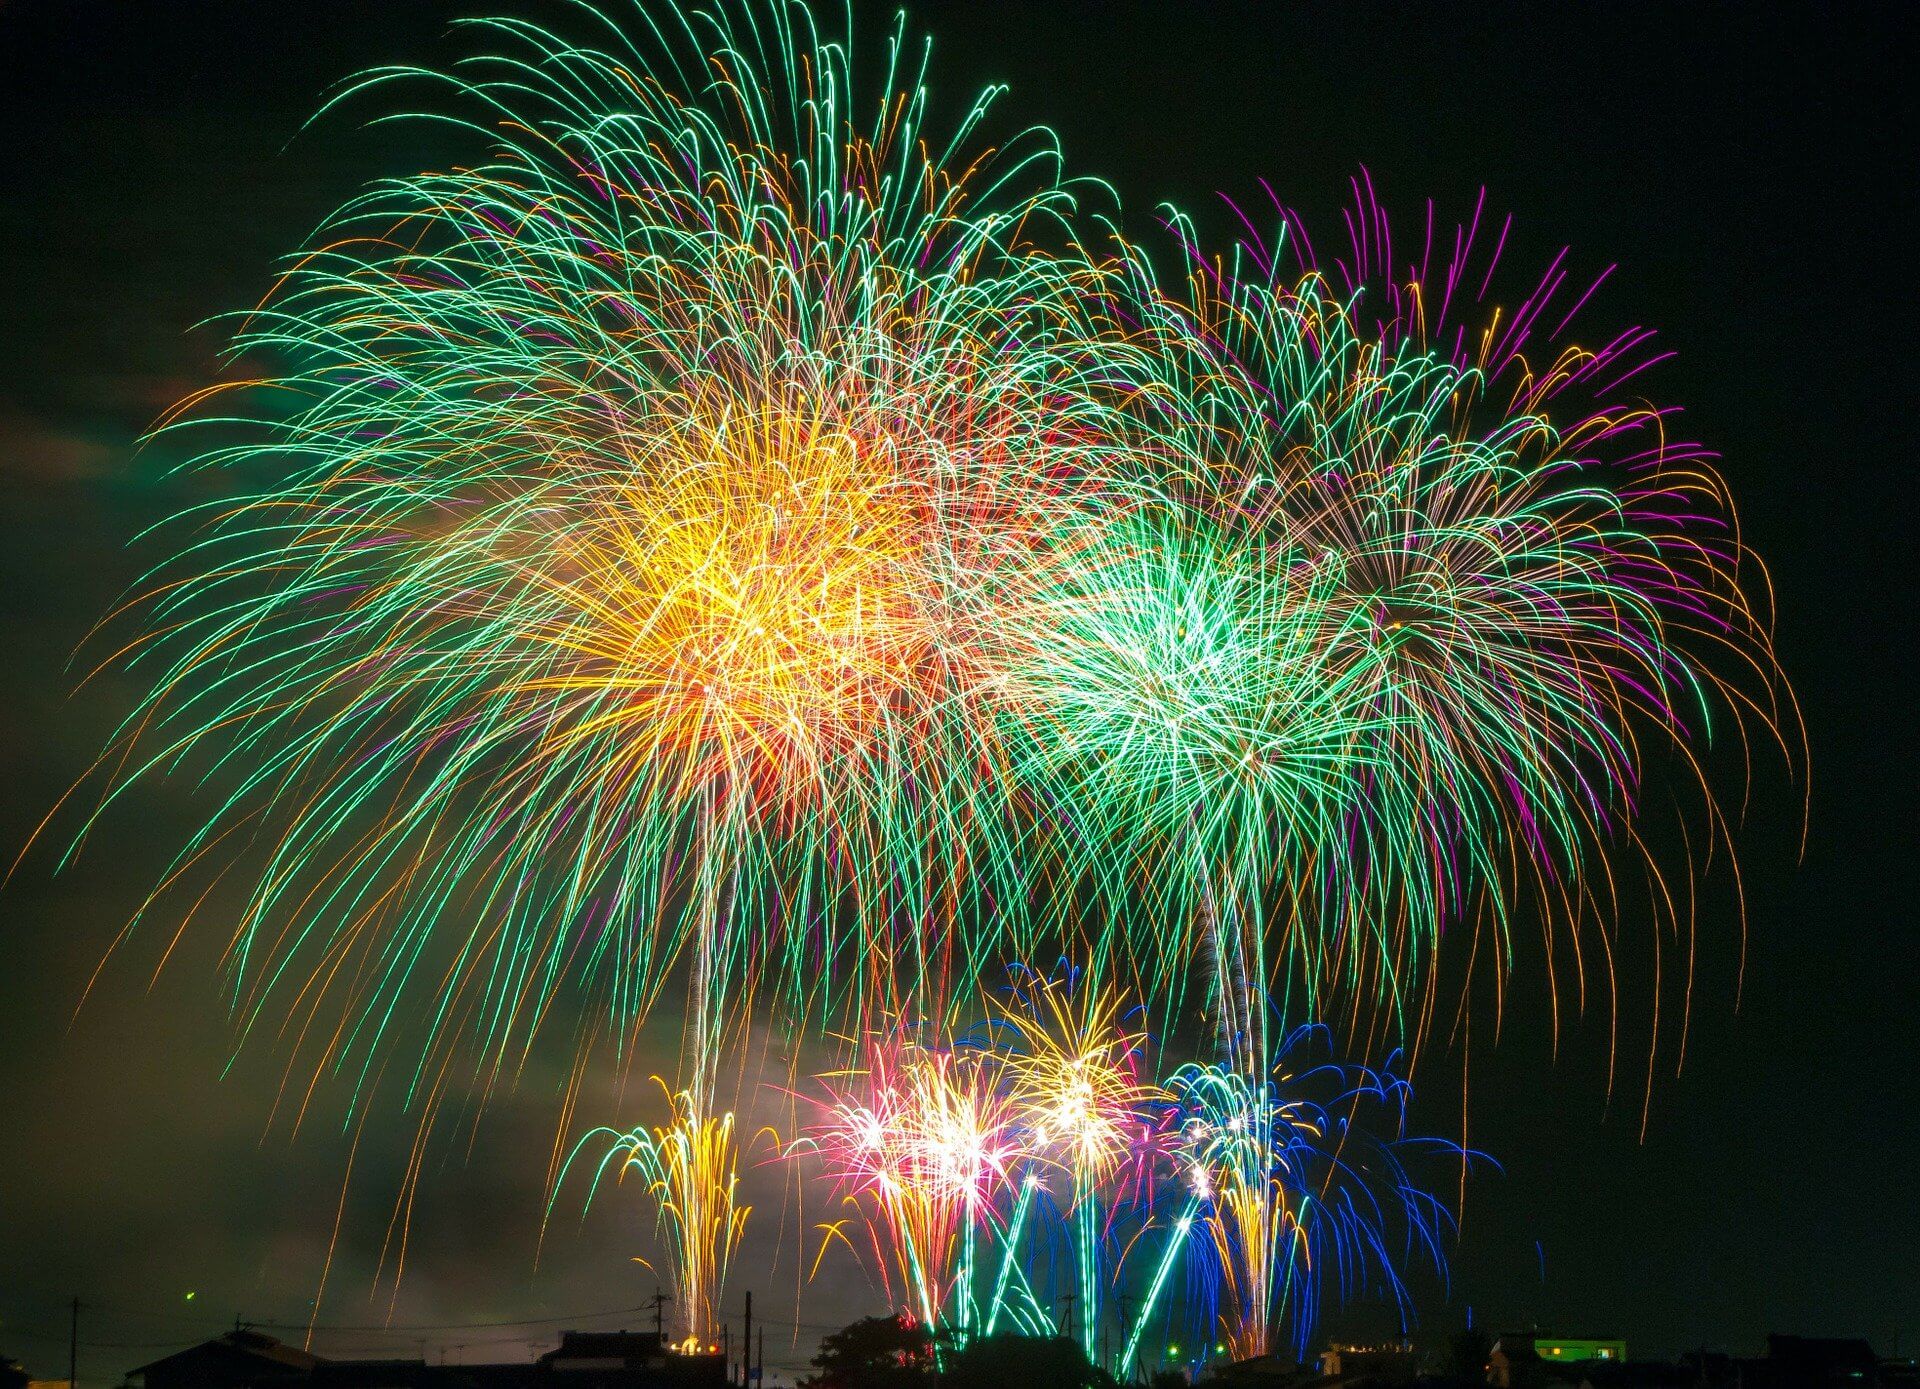 How Fireworks Turn into a Beautiful, Colourful Explosion